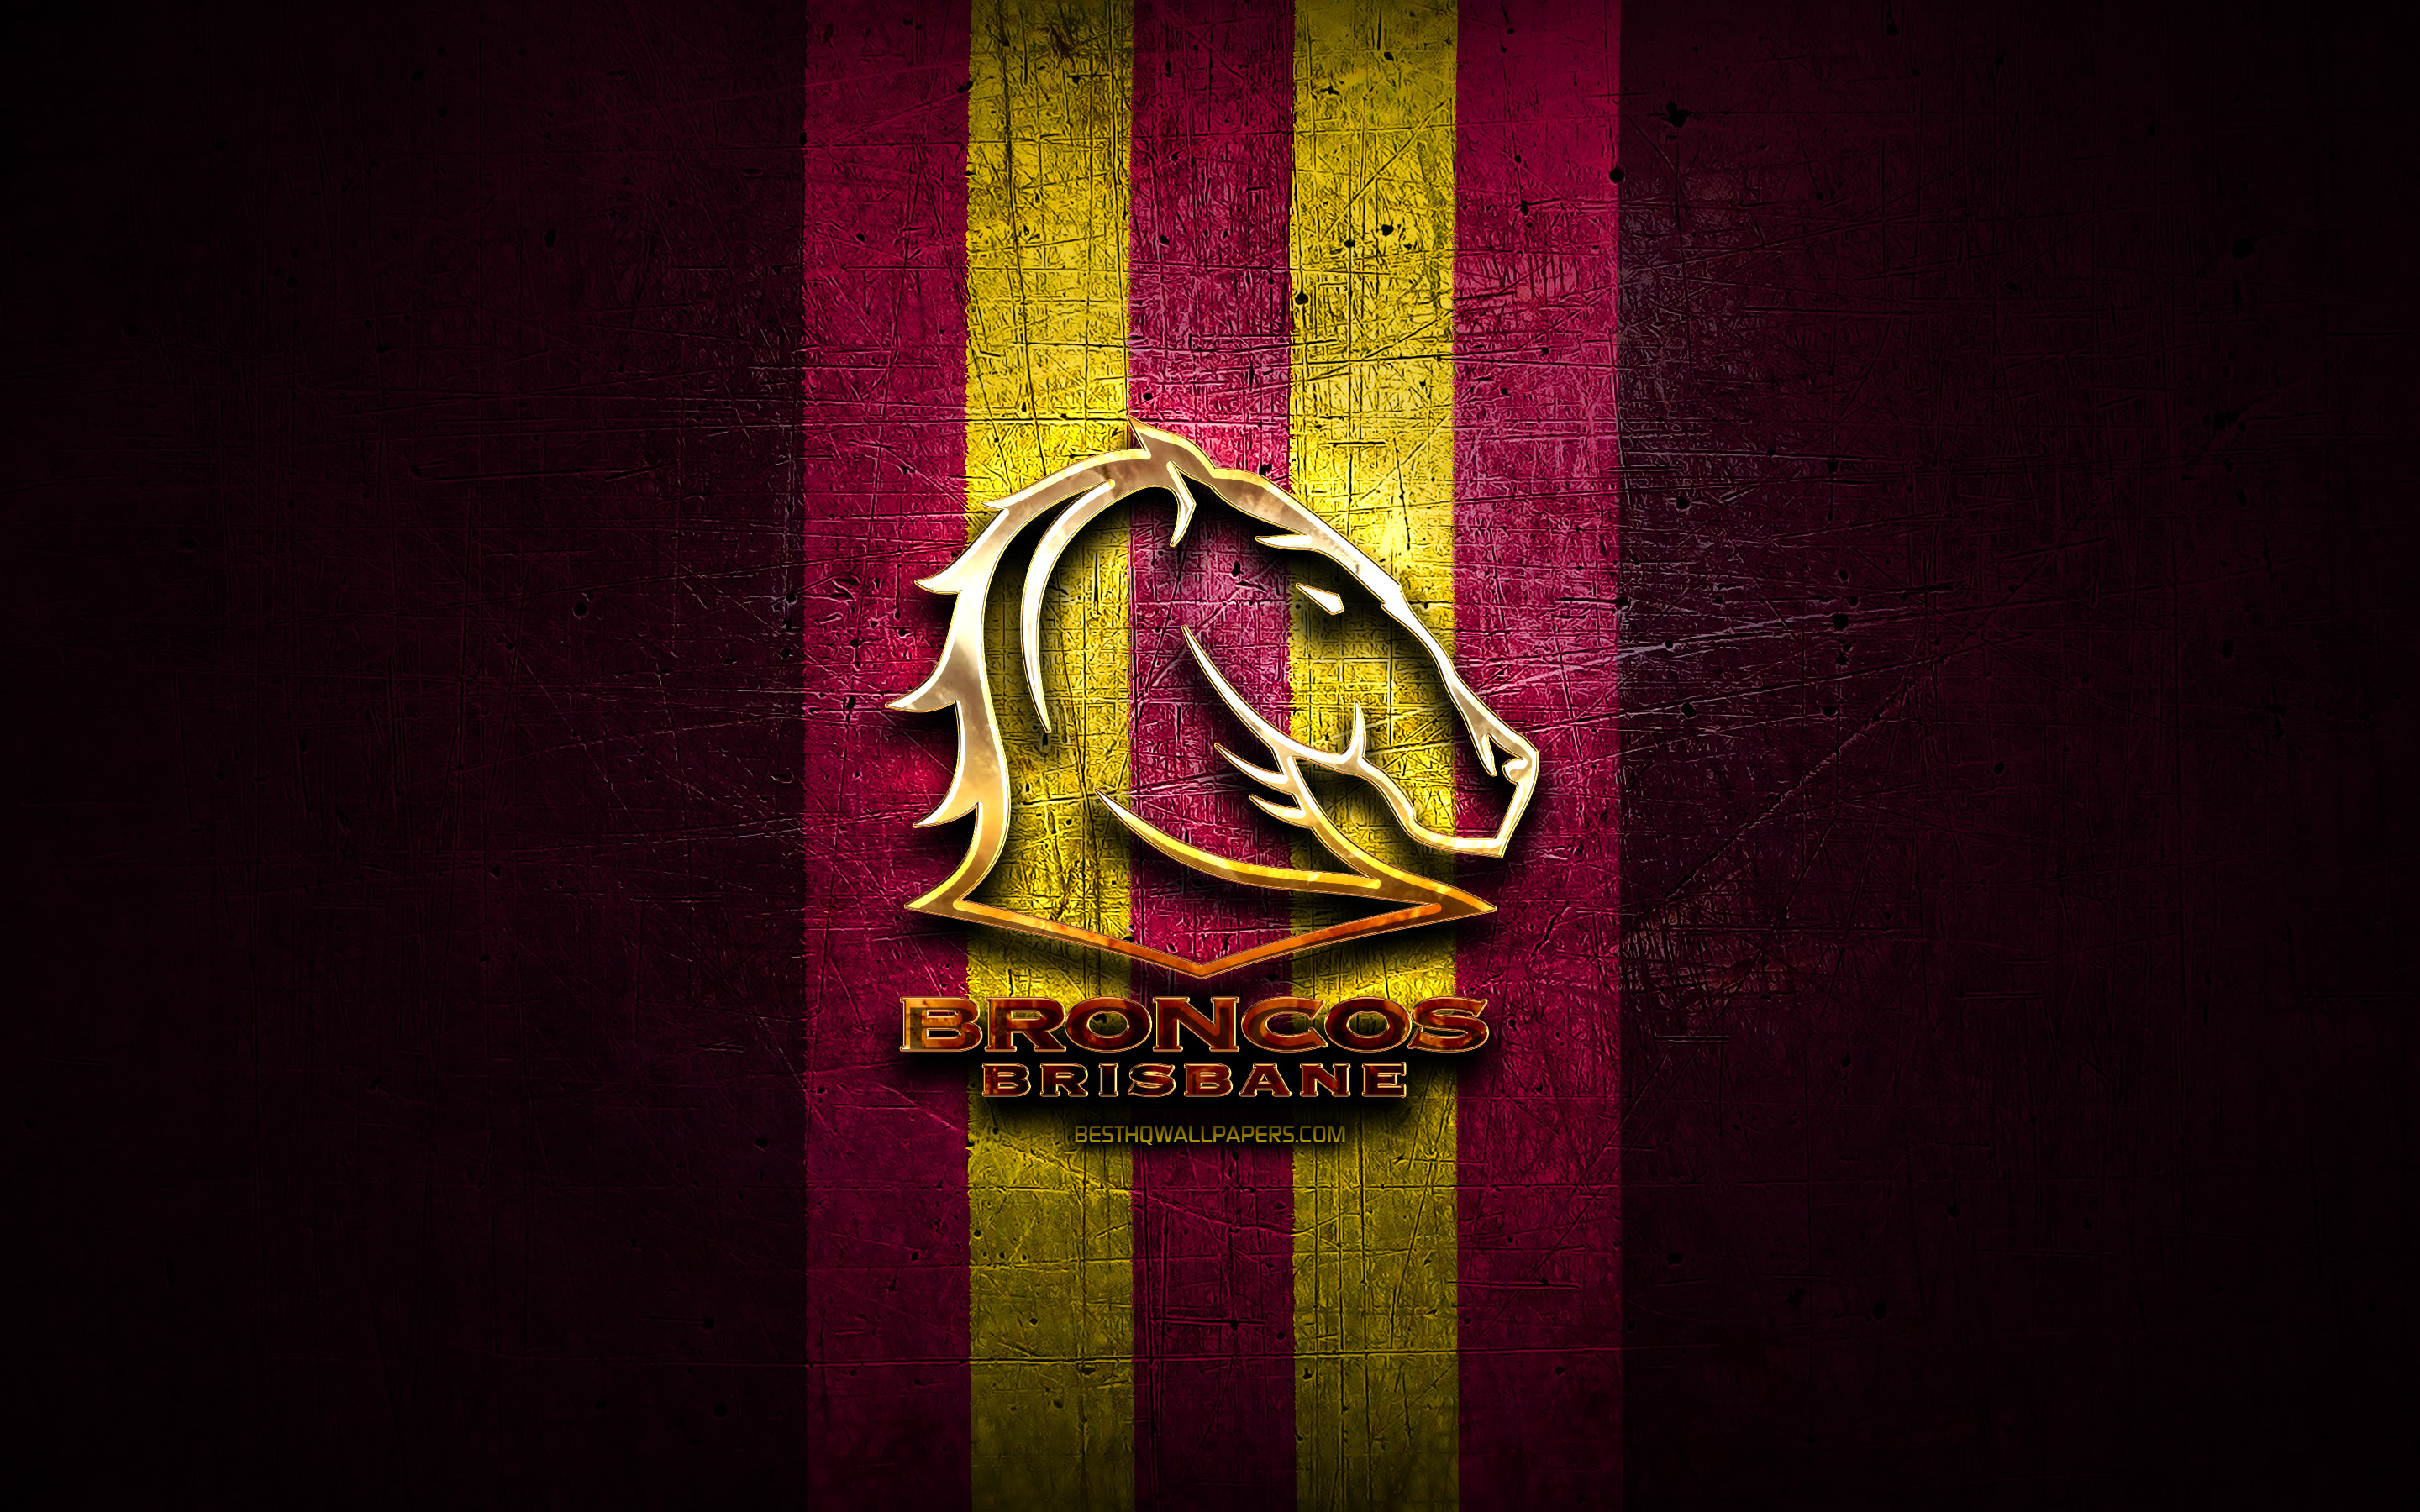 Download wallpaper Brisbane Broncos, golden logo, National Rugby League, purple metal background, australian rugby club, Brisbane Broncos logo, rugby, NRL for desktop with resolution 2880x1800. High Quality HD picture wallpaper